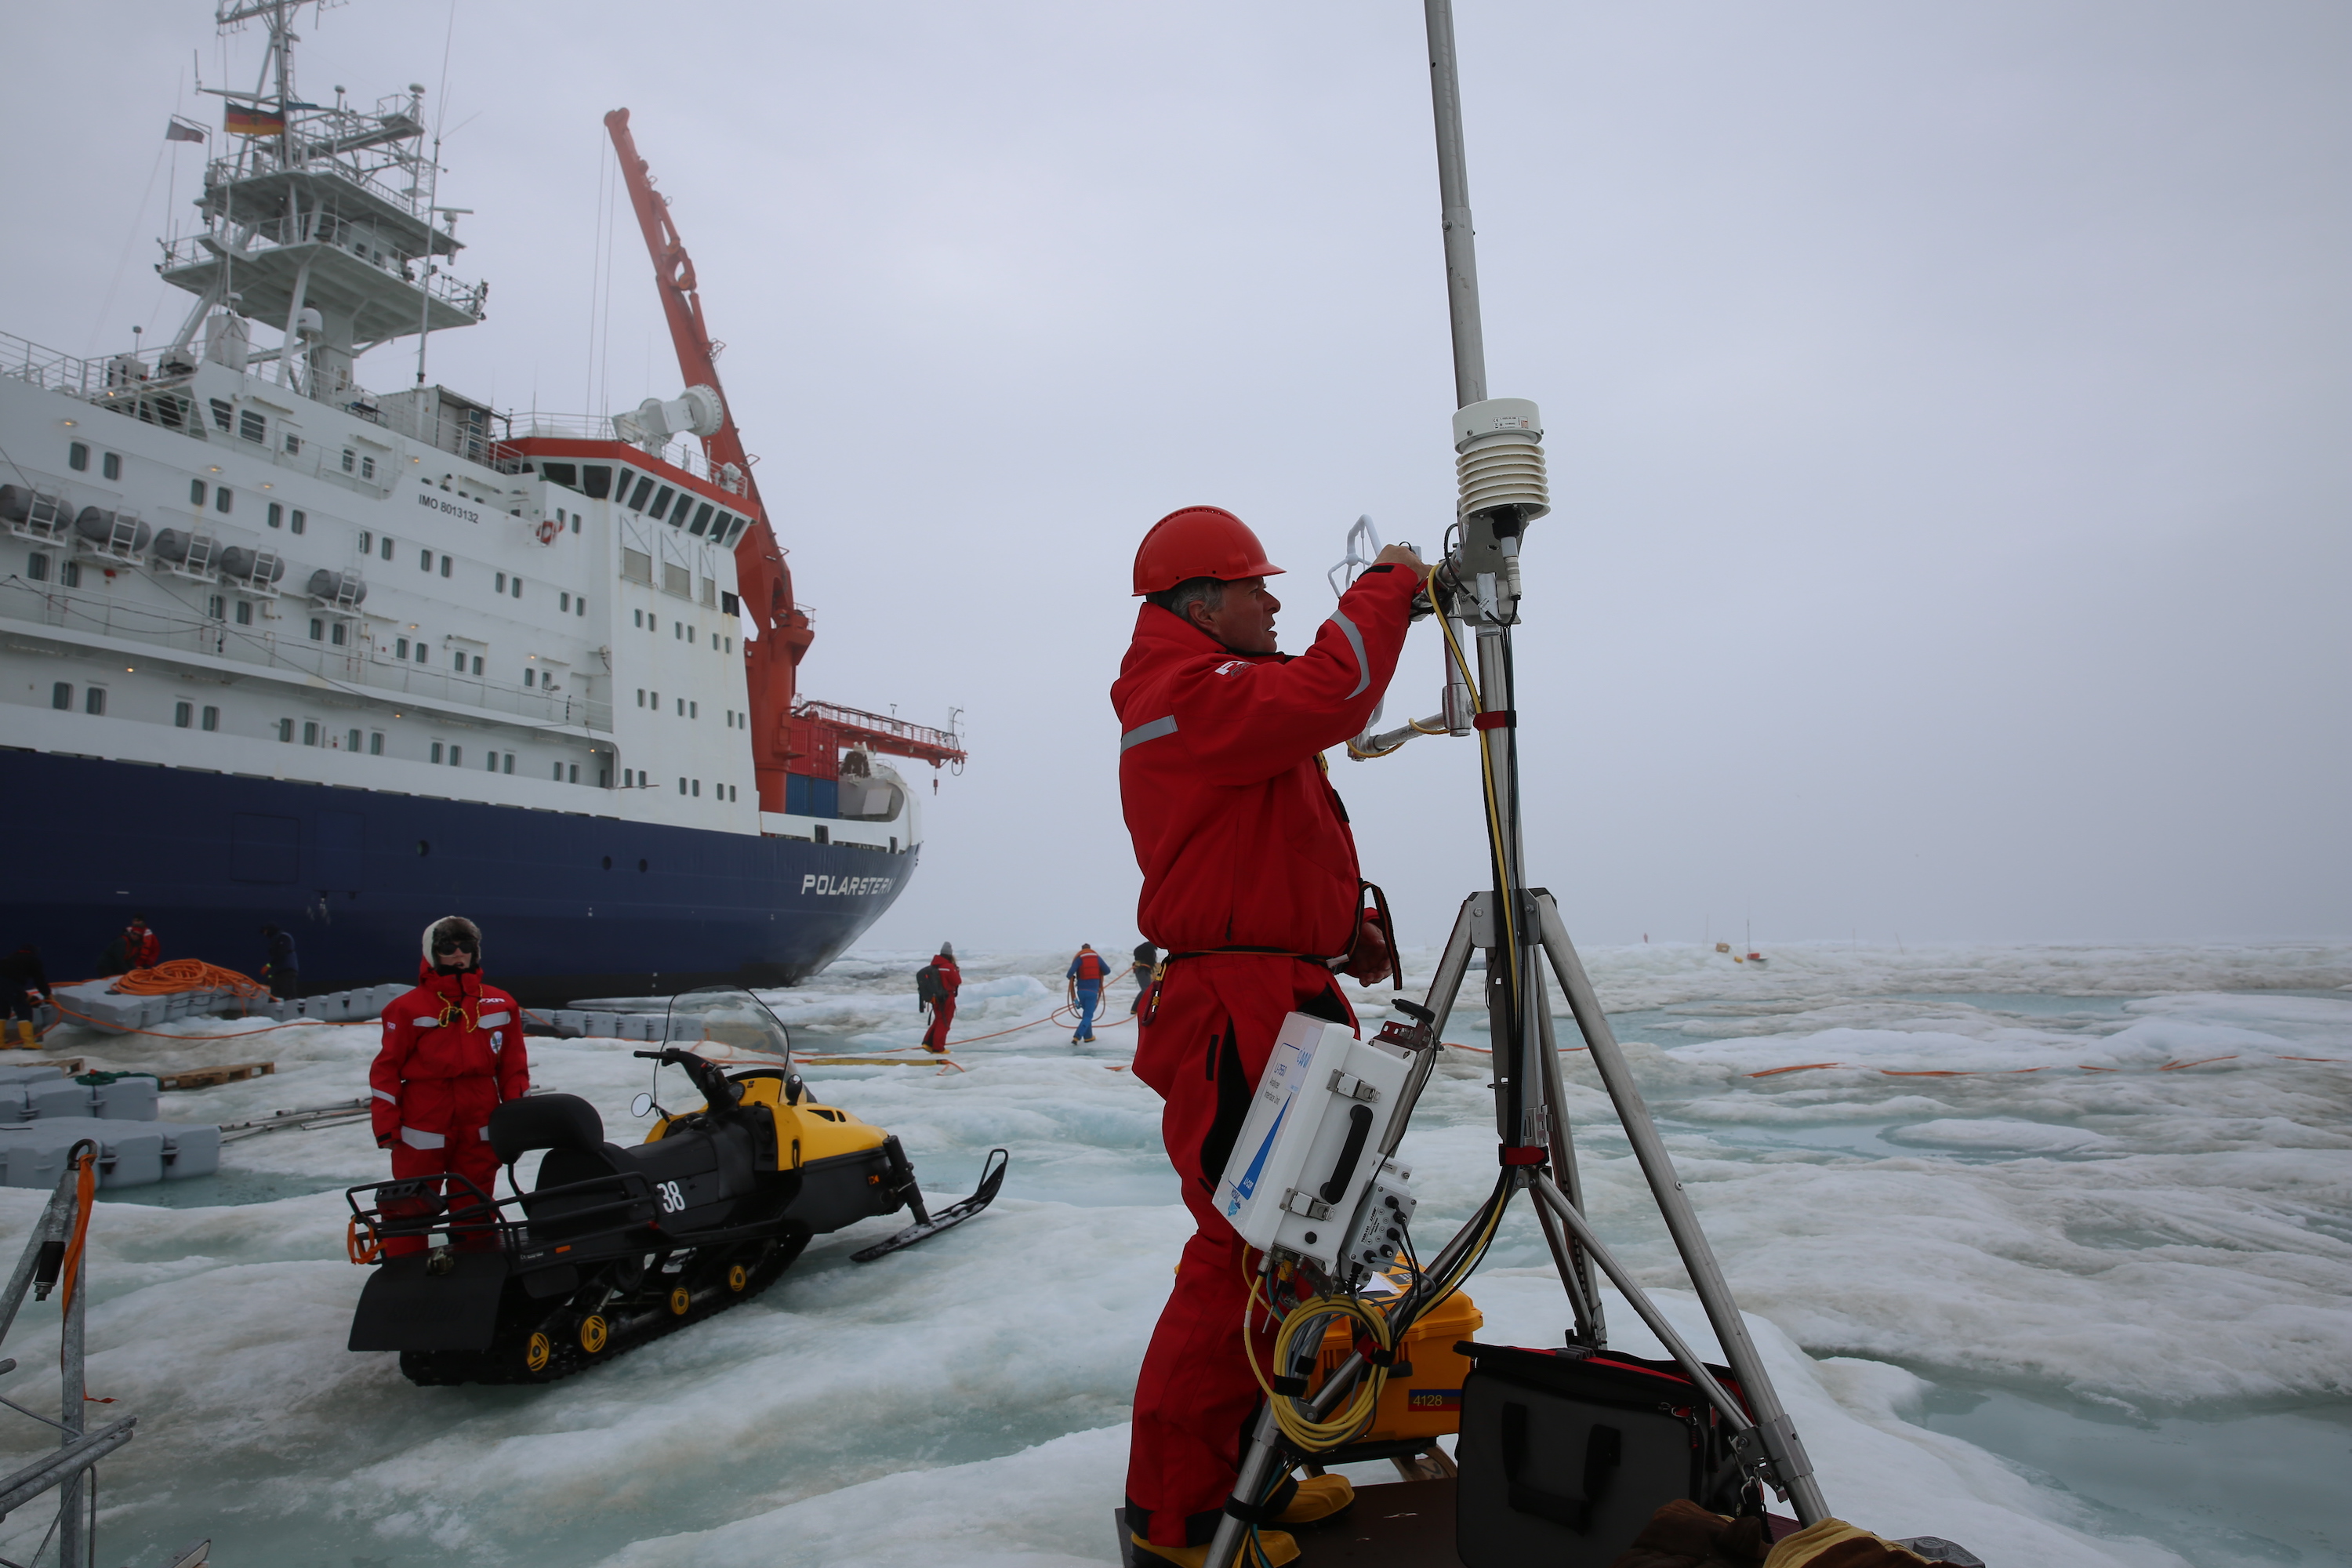 Instrument recovery during MOSAiC Leg 4